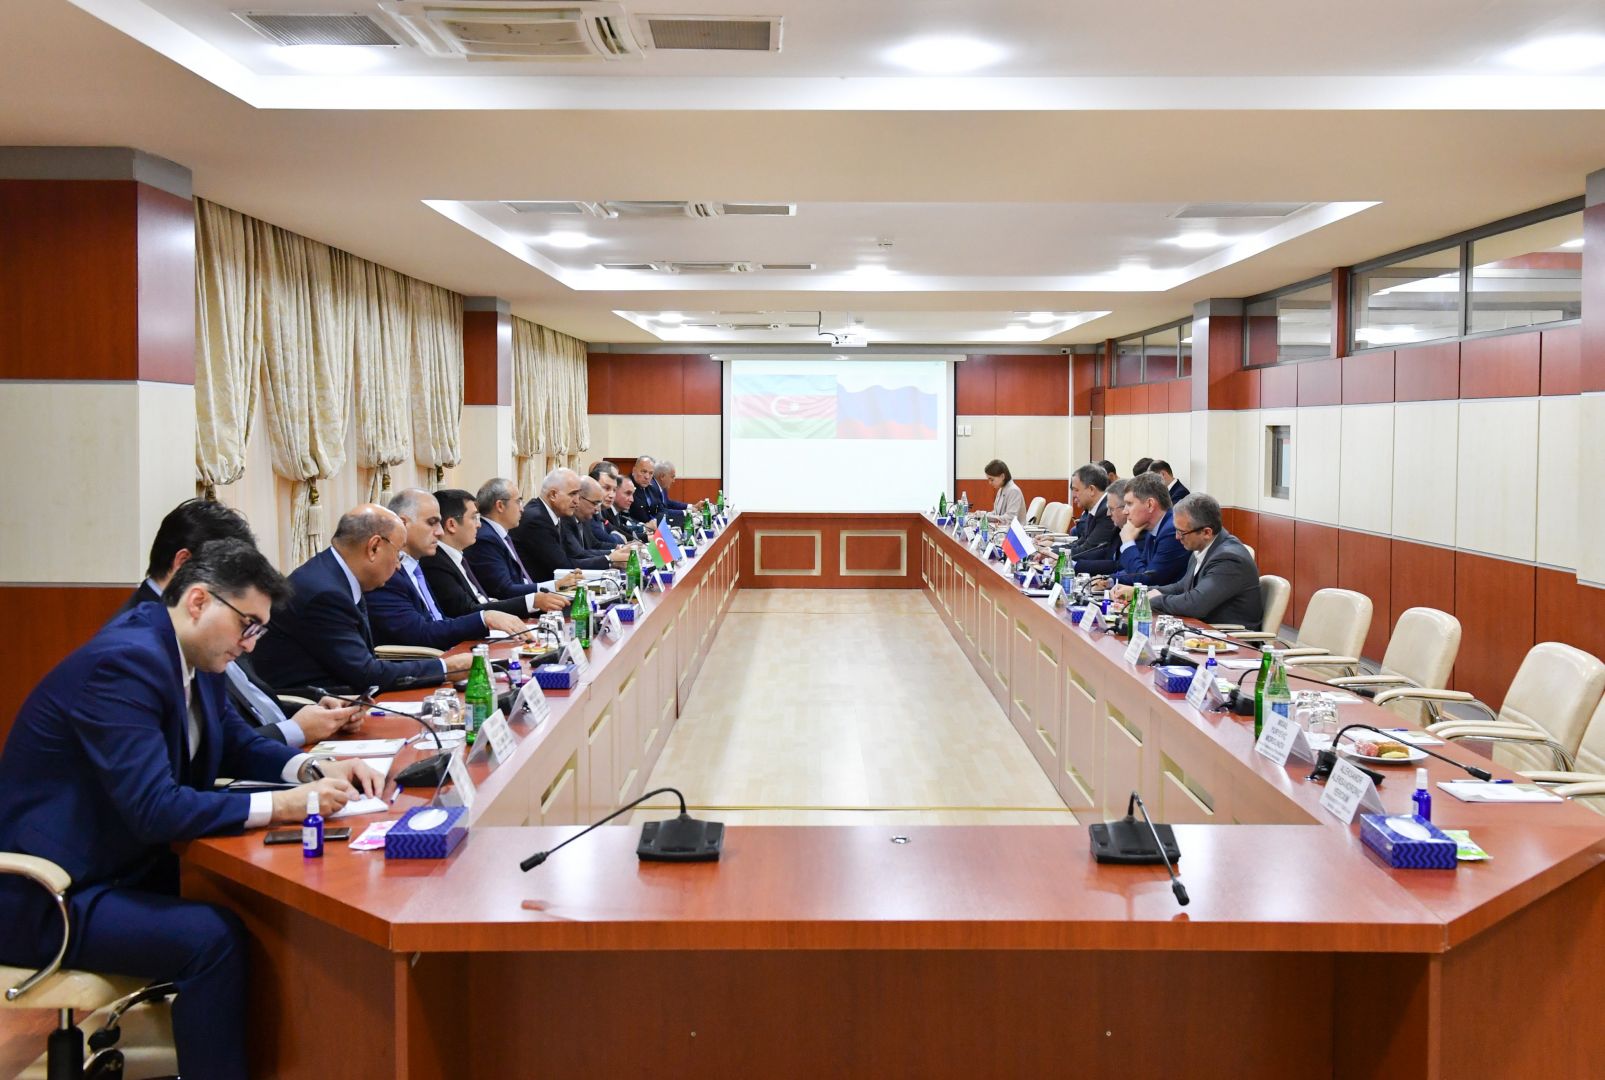 Baku, Moscow discuss infrastructure modernization at checkpoints [PHOTO]